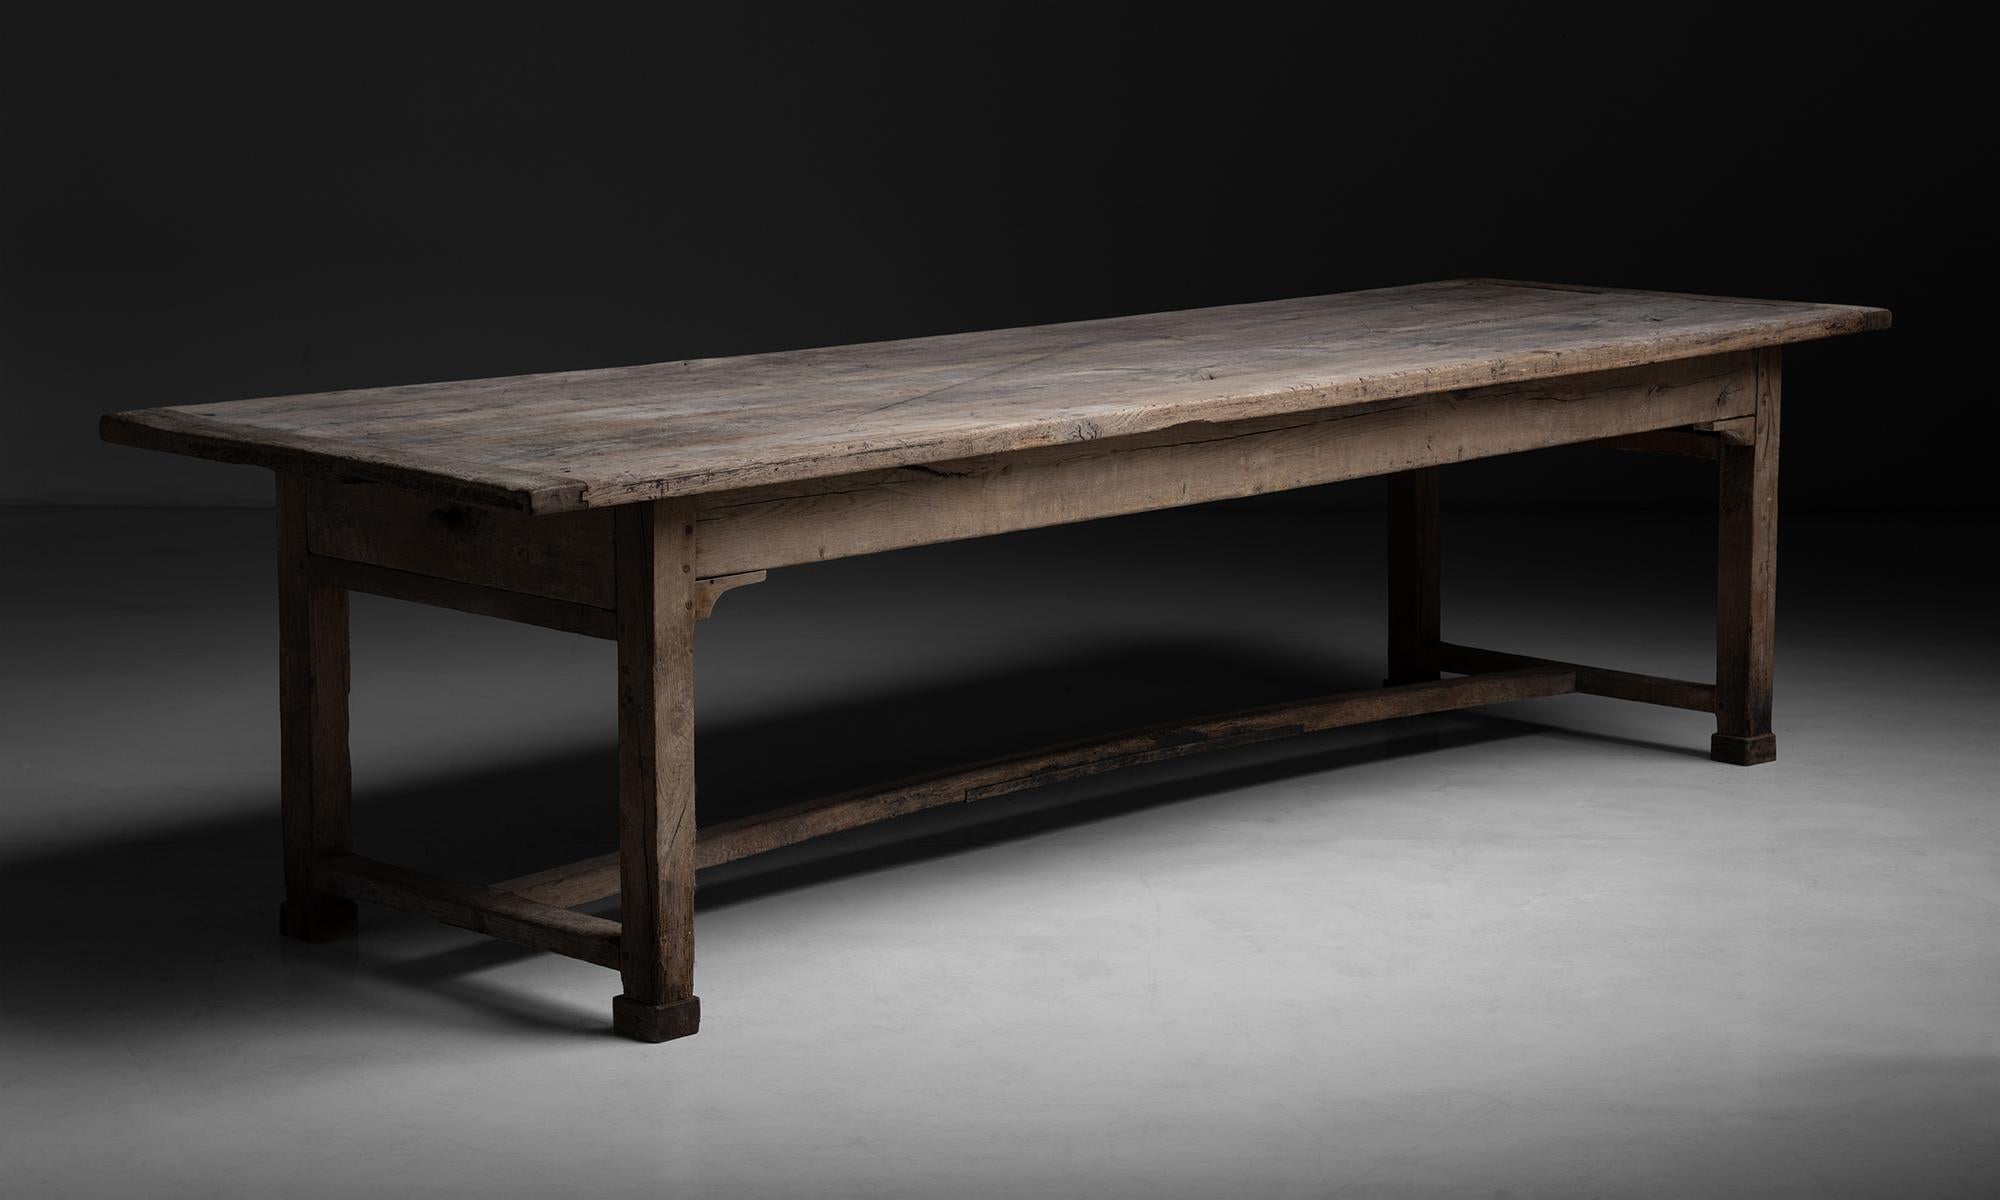 Oak Dining Table, France circa 1890

Solid oak construction, plank top with false drawers.

Measures 119”L x 36.5”d x 30.25”h.